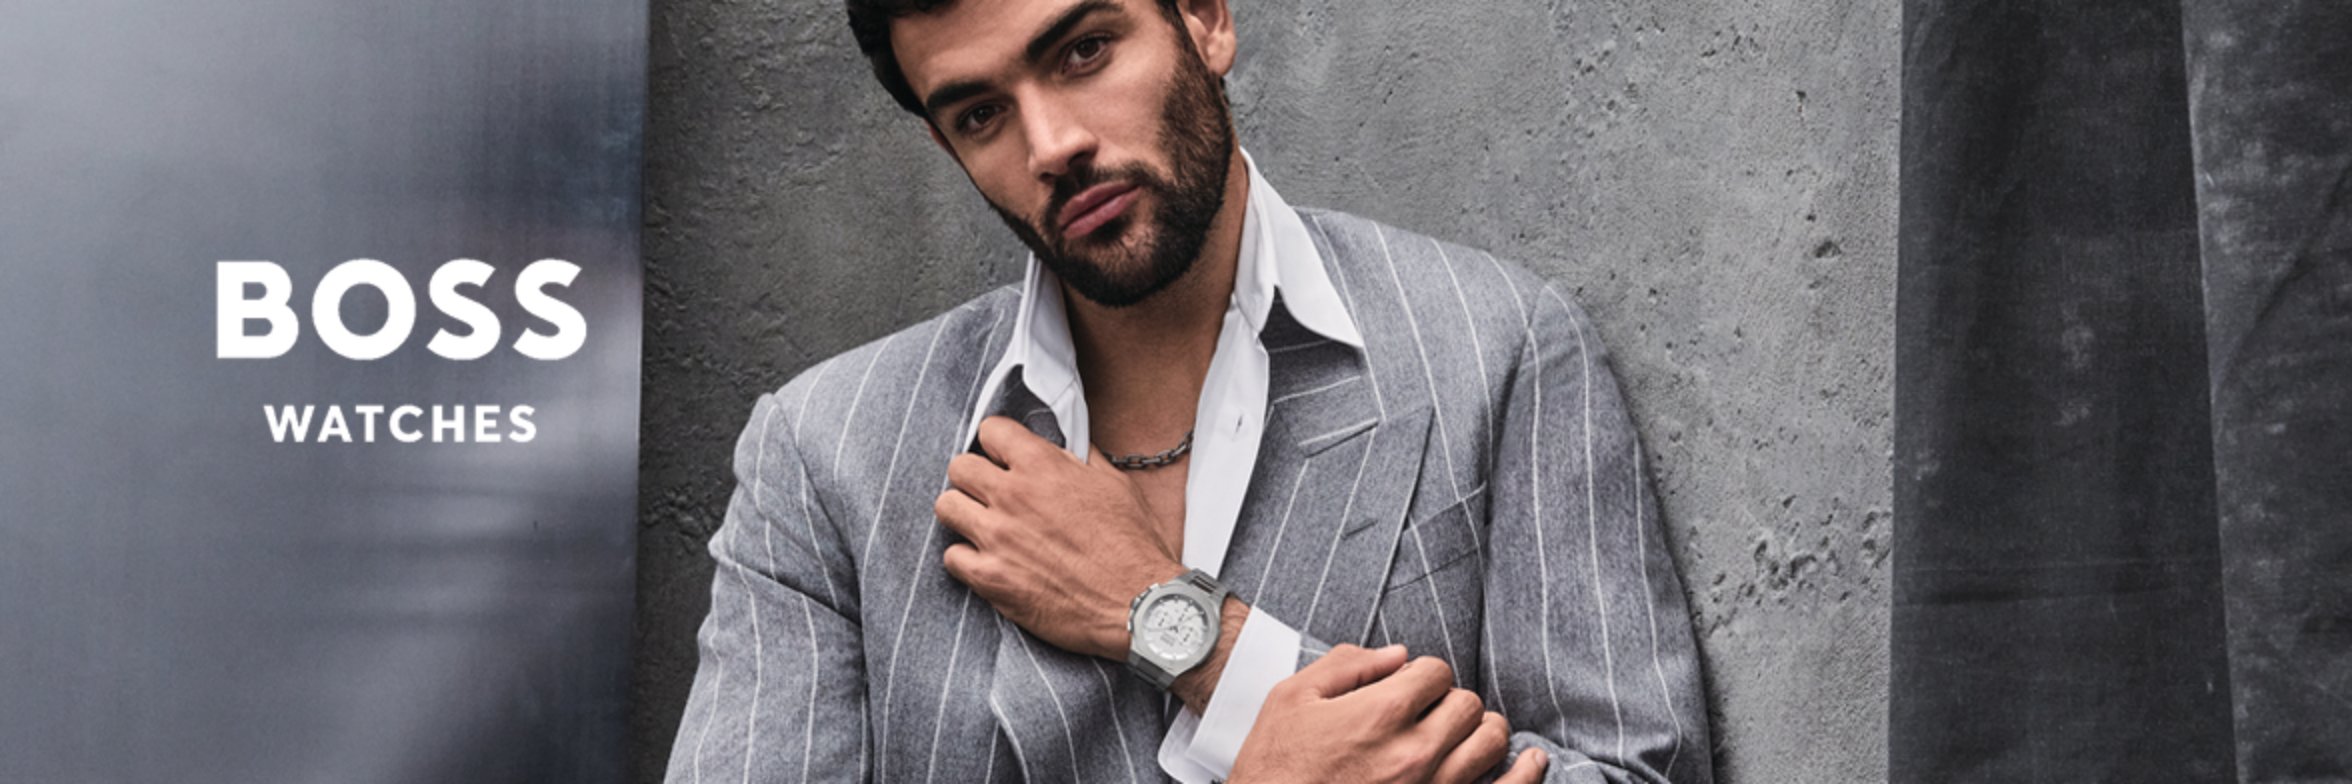 Hugo Boss Watches | BOSS women | Fast men watches and for delivery